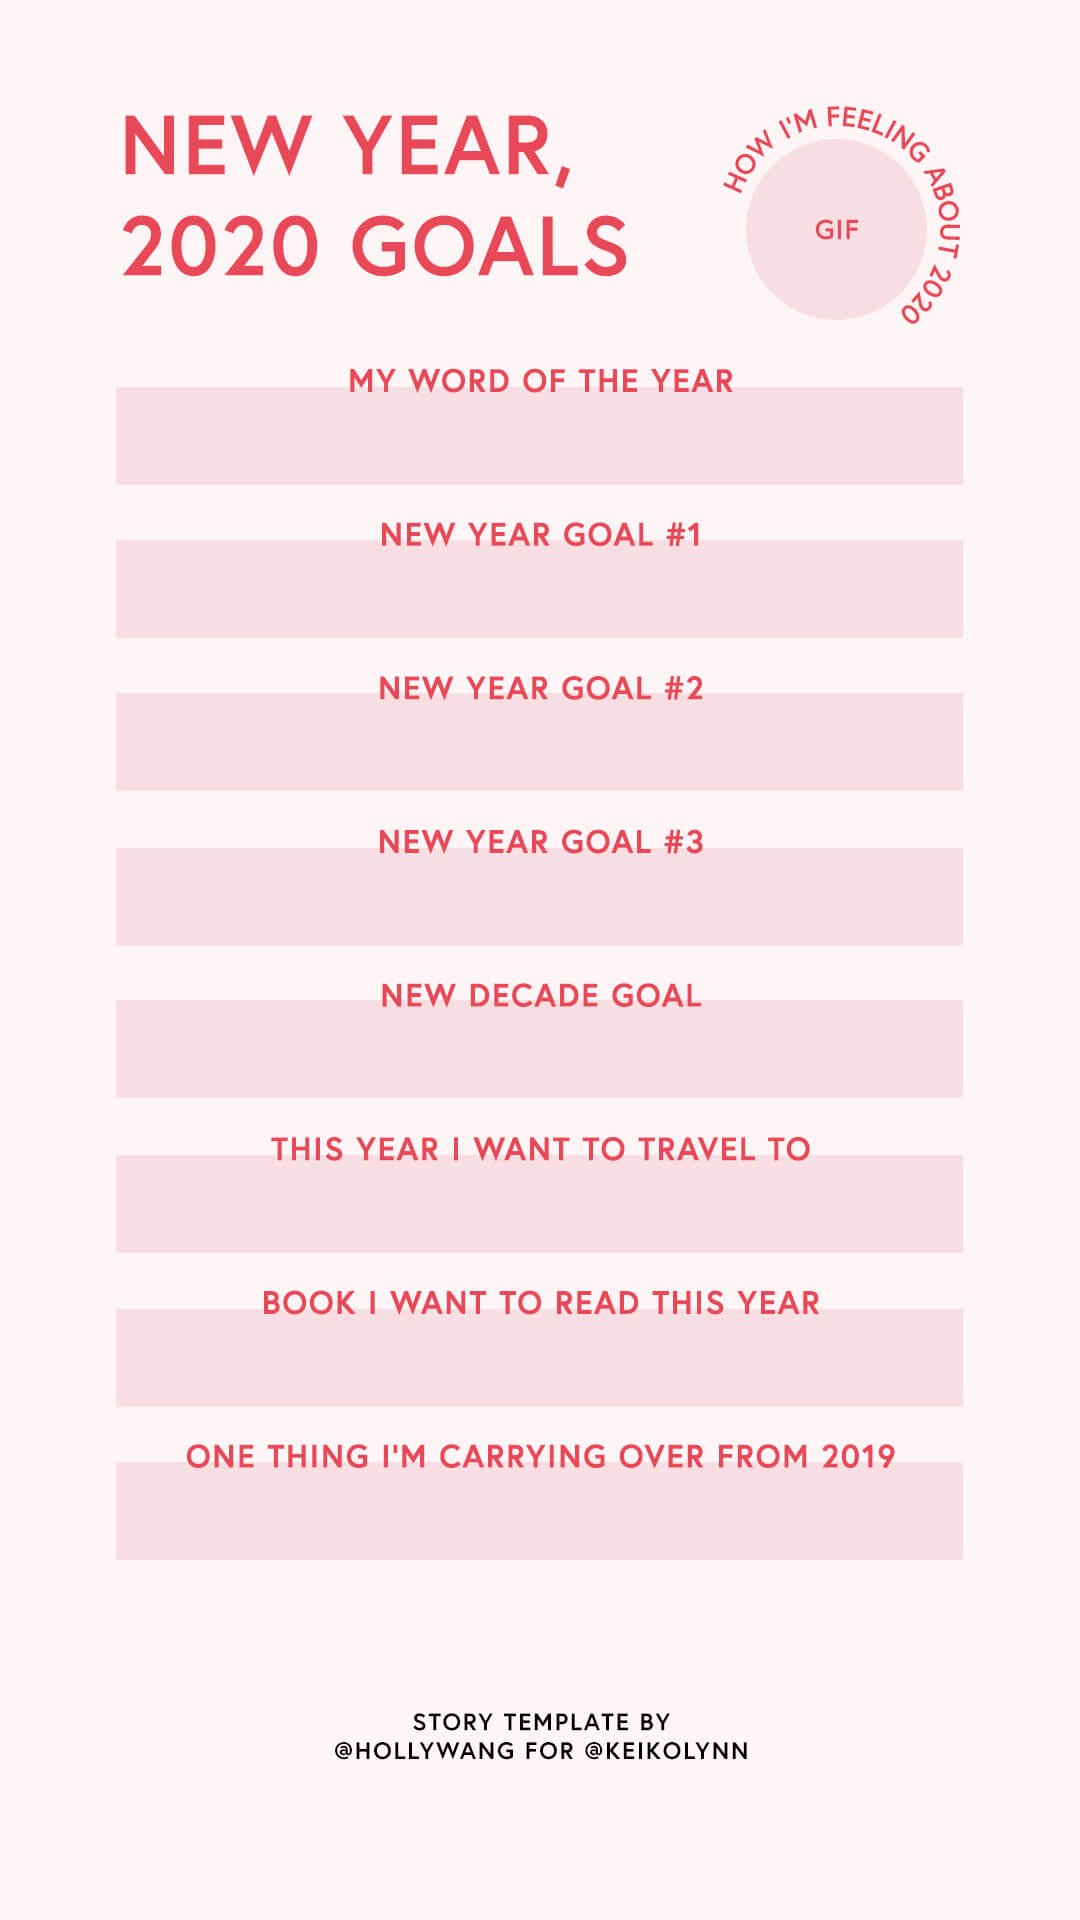 instagram story templates new year goals 2020